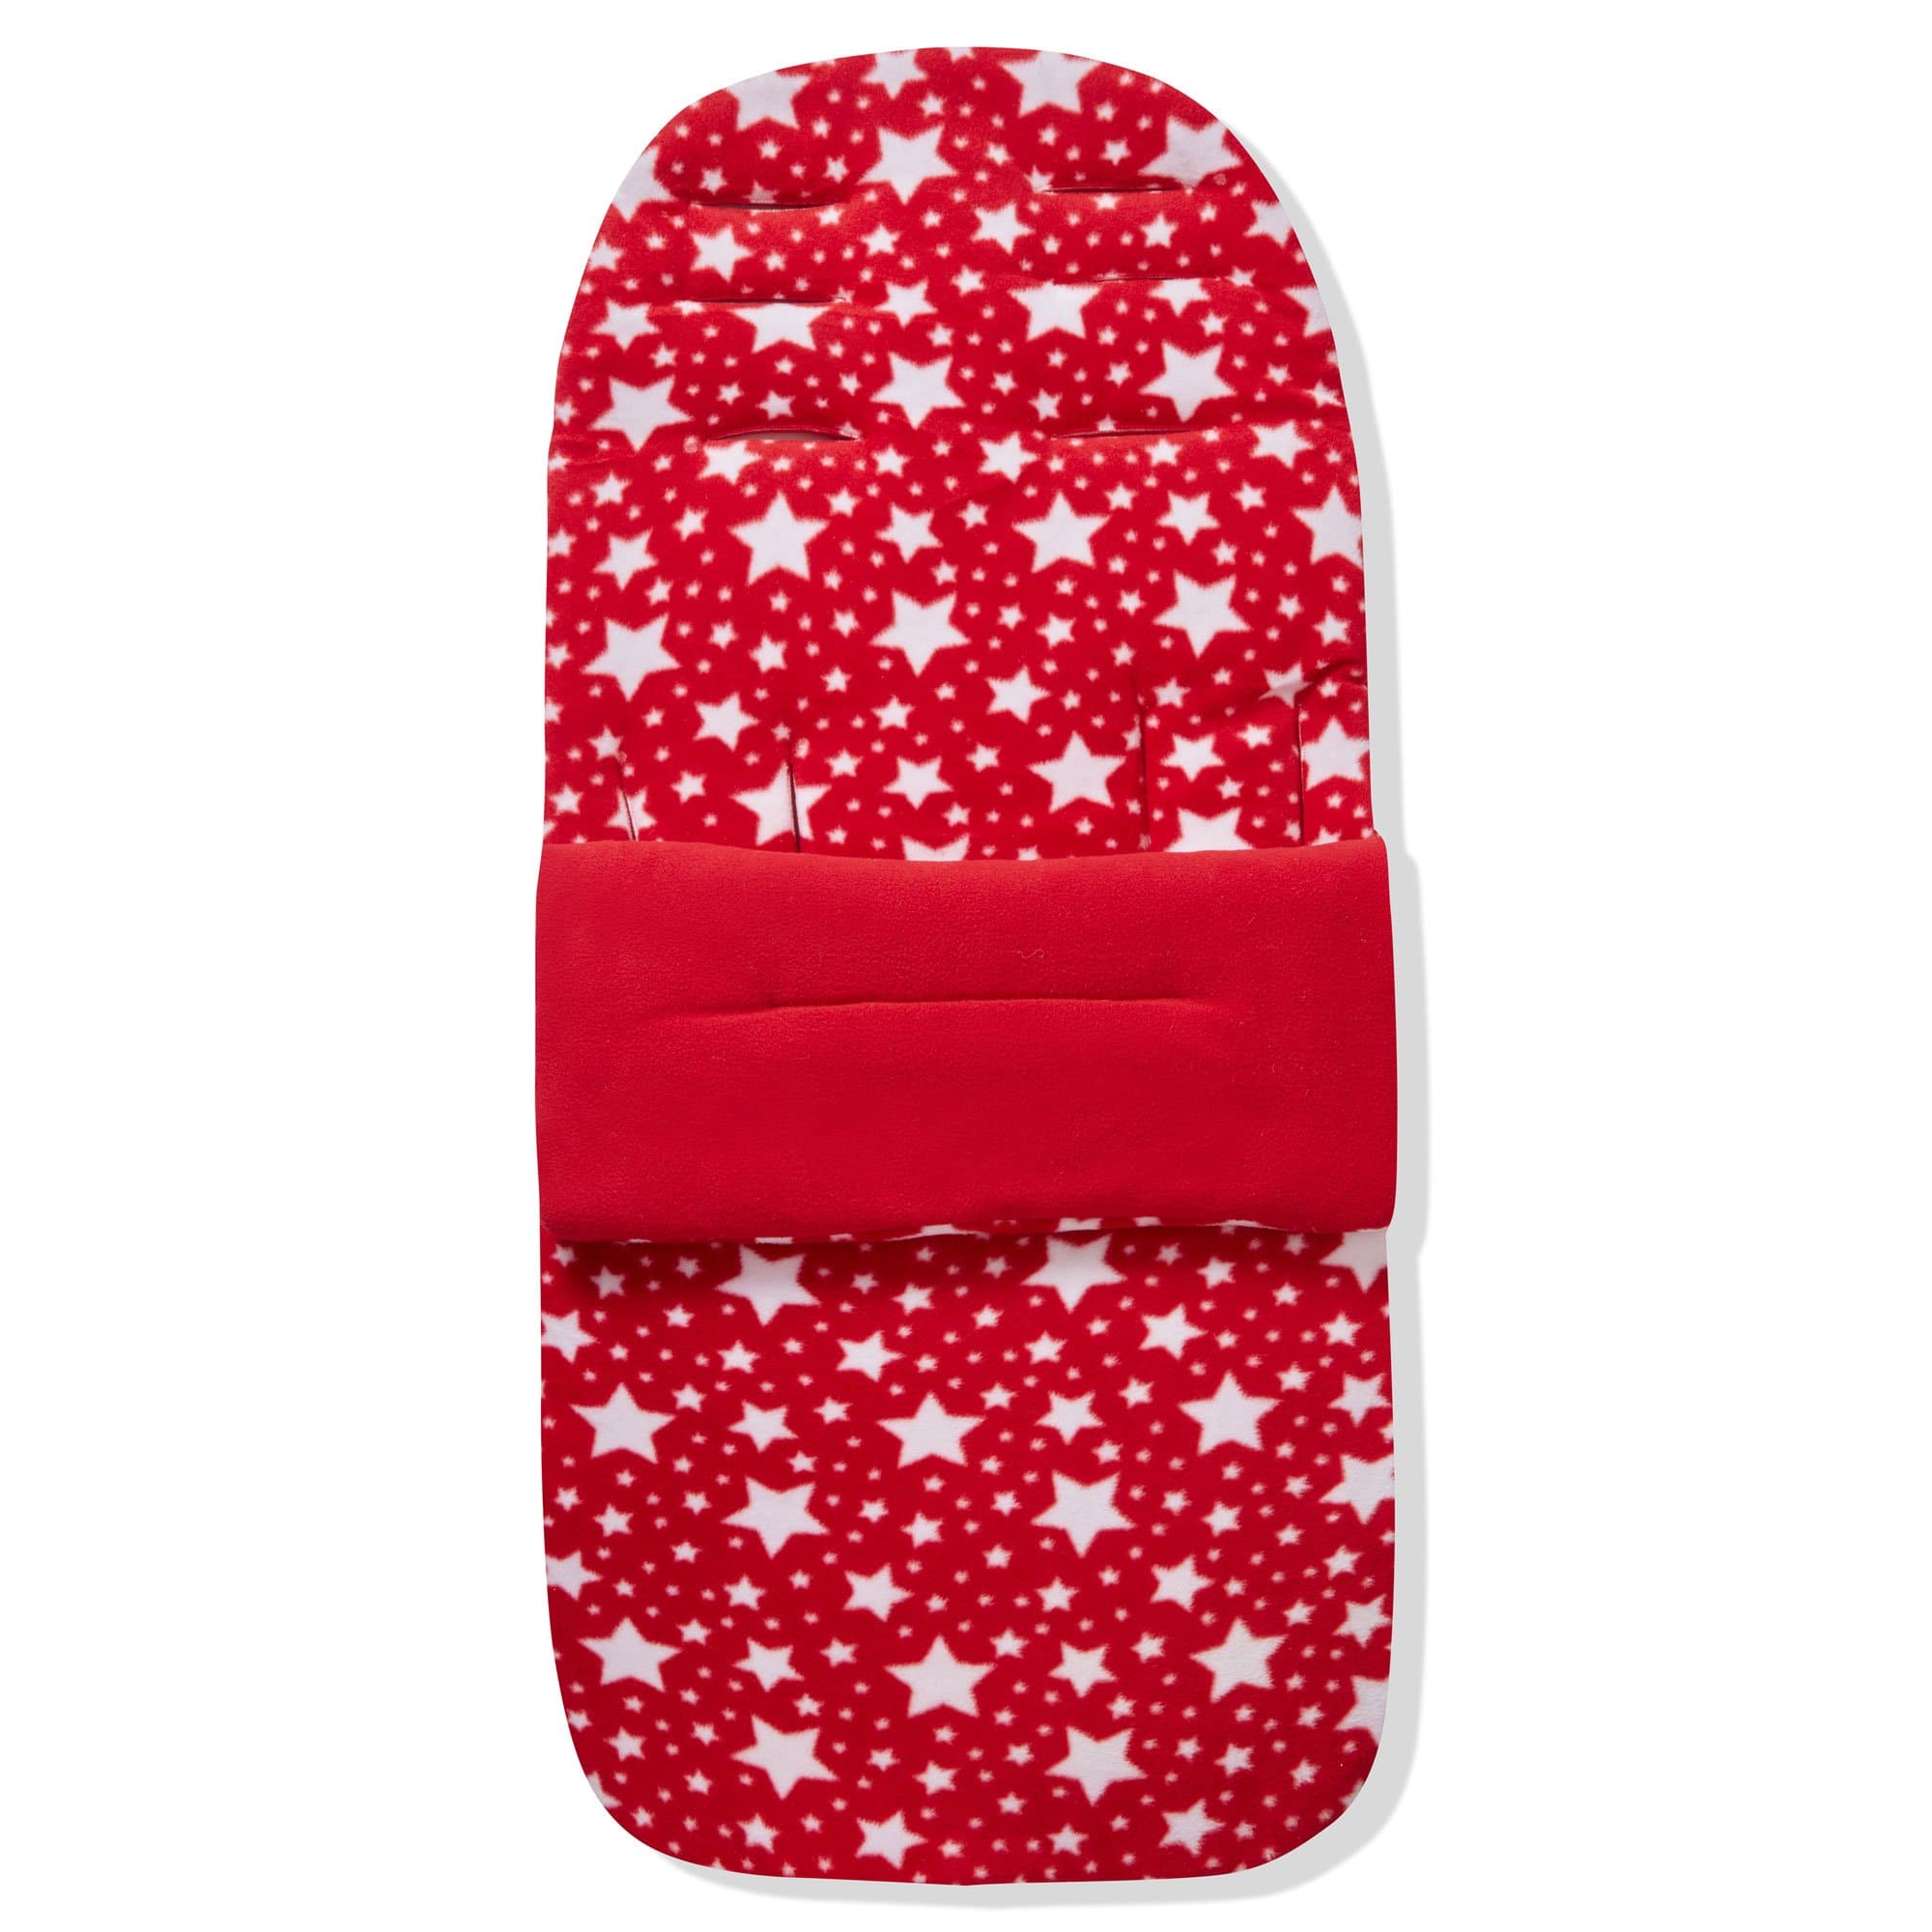 Fleece Footmuff / Cosy Toes Compatible with Tutti Bambini - Red Star / Fits All Models | For Your Little One